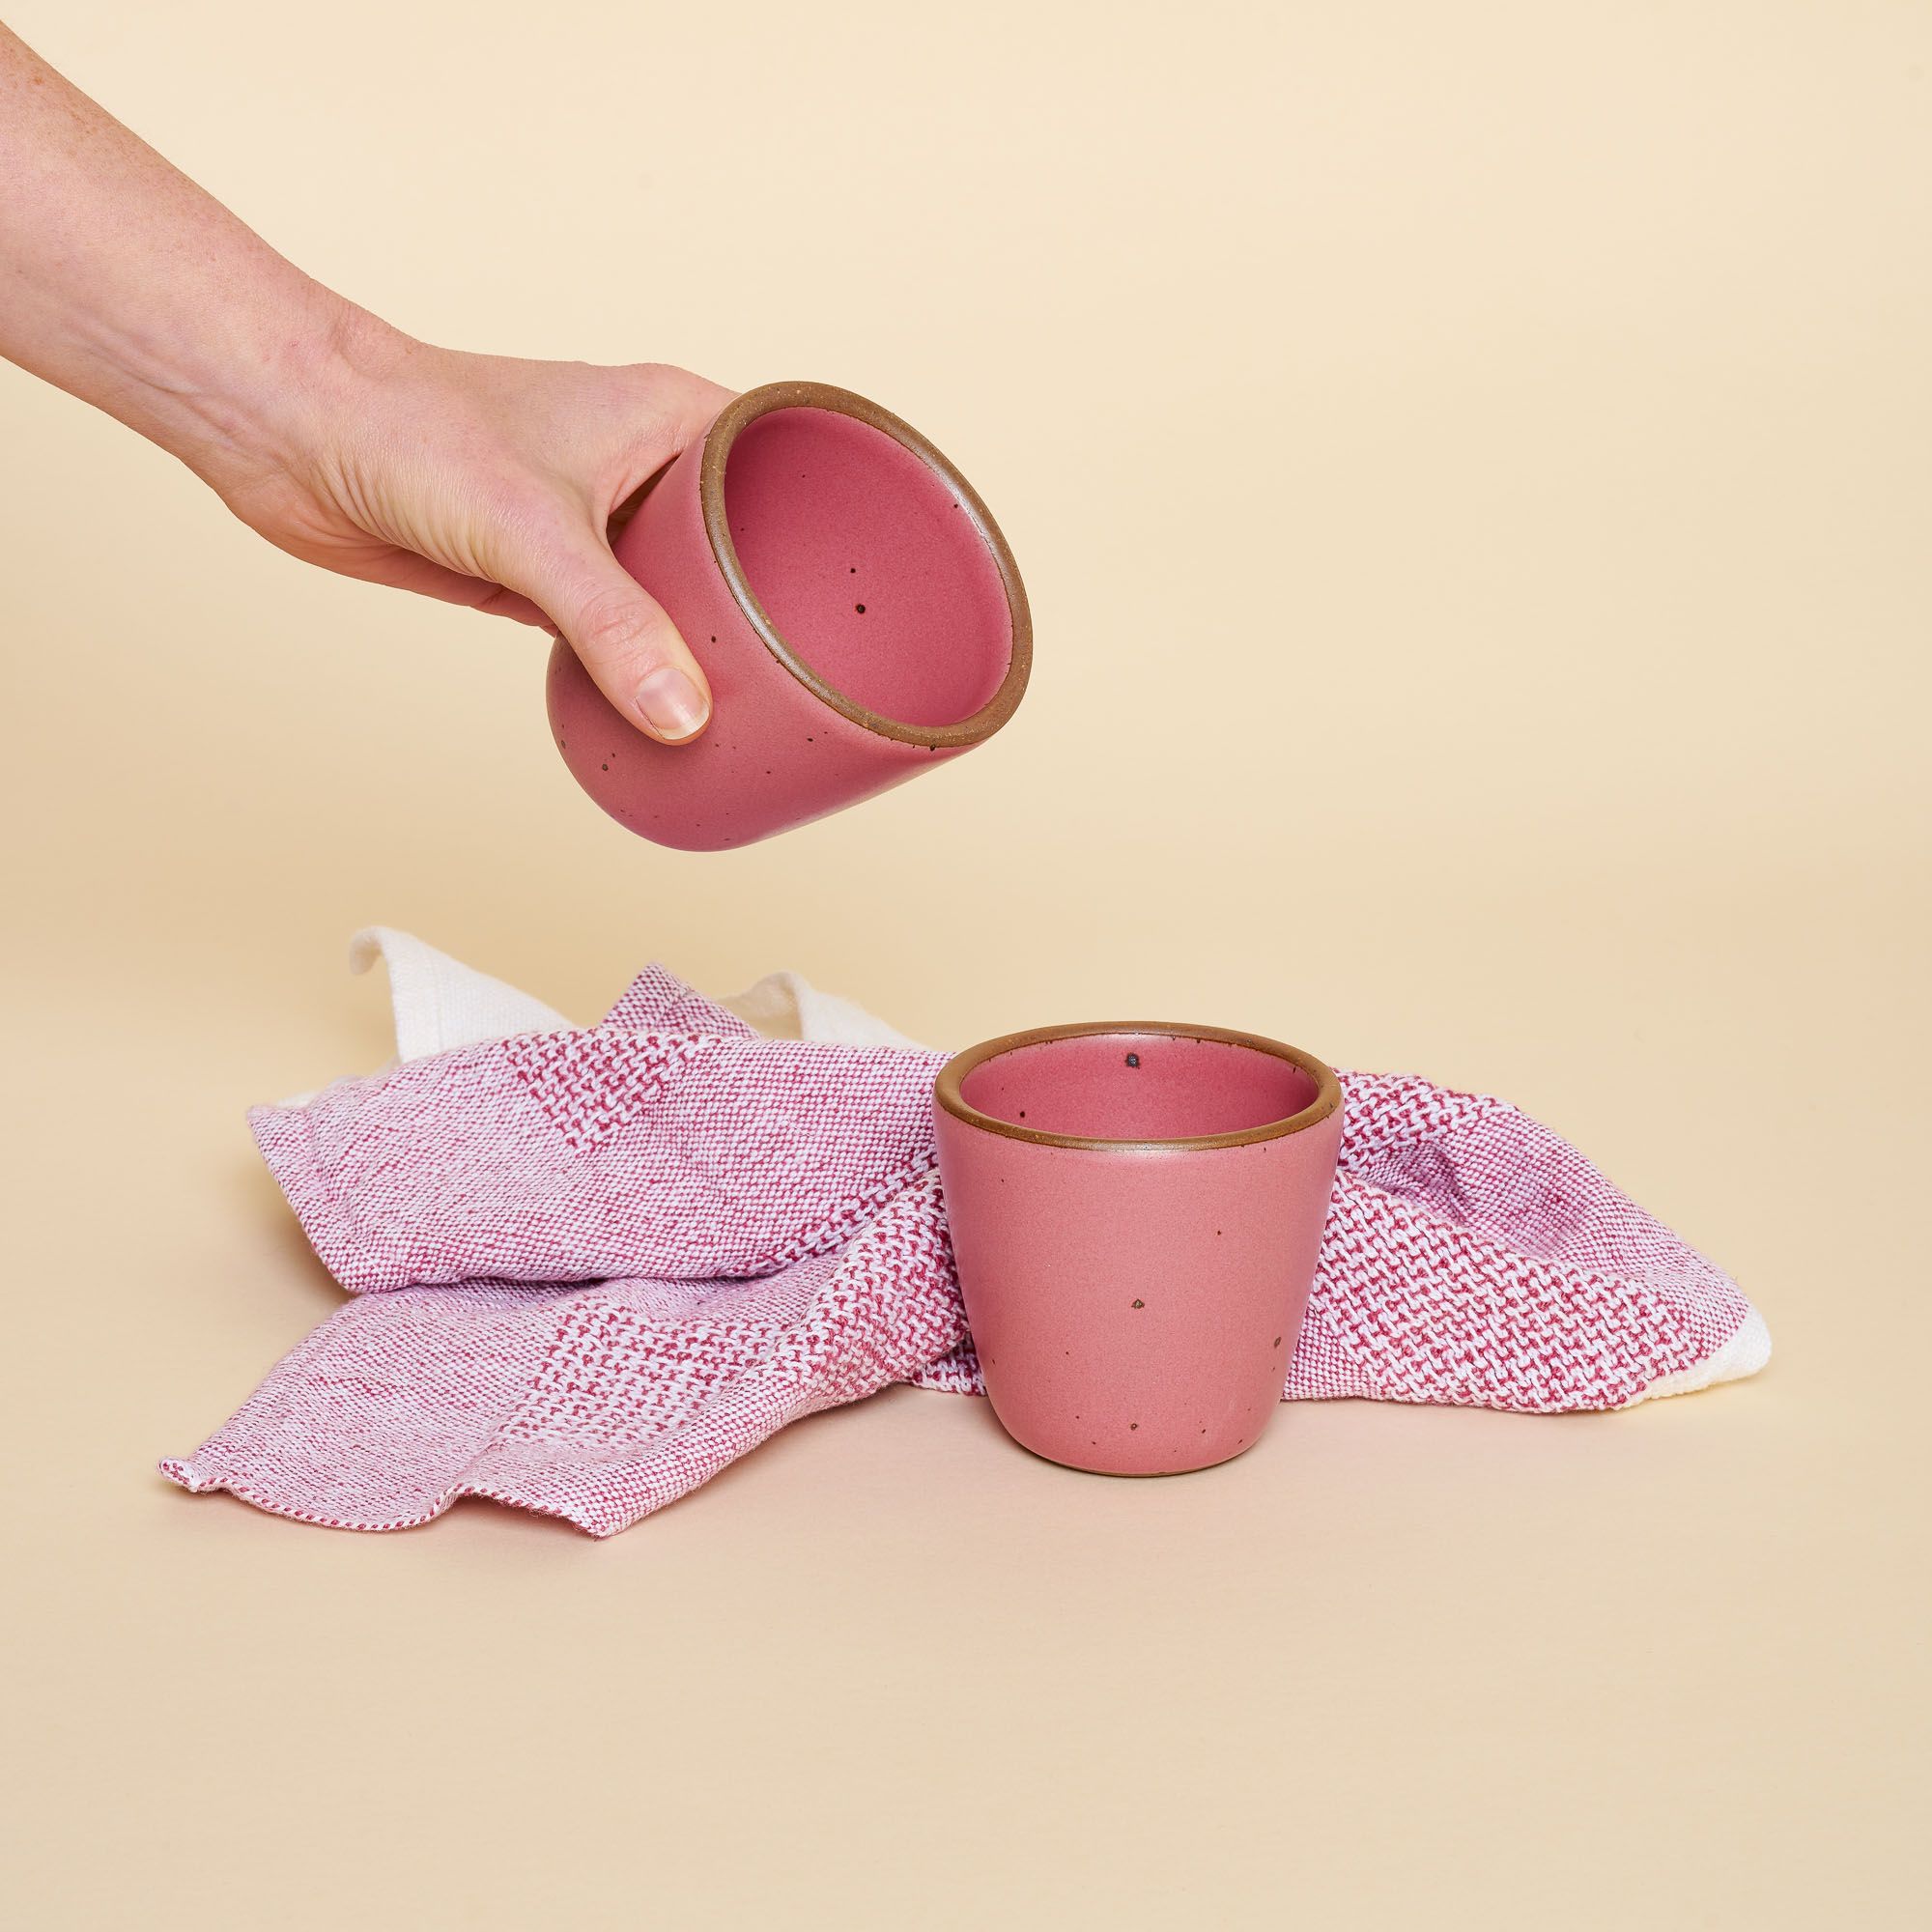 A pair of chai kulhads – handleless cups – in Rococo, a hot pink, photographed with a soft, organic cotton and linen blend tea towel in a matching hue.